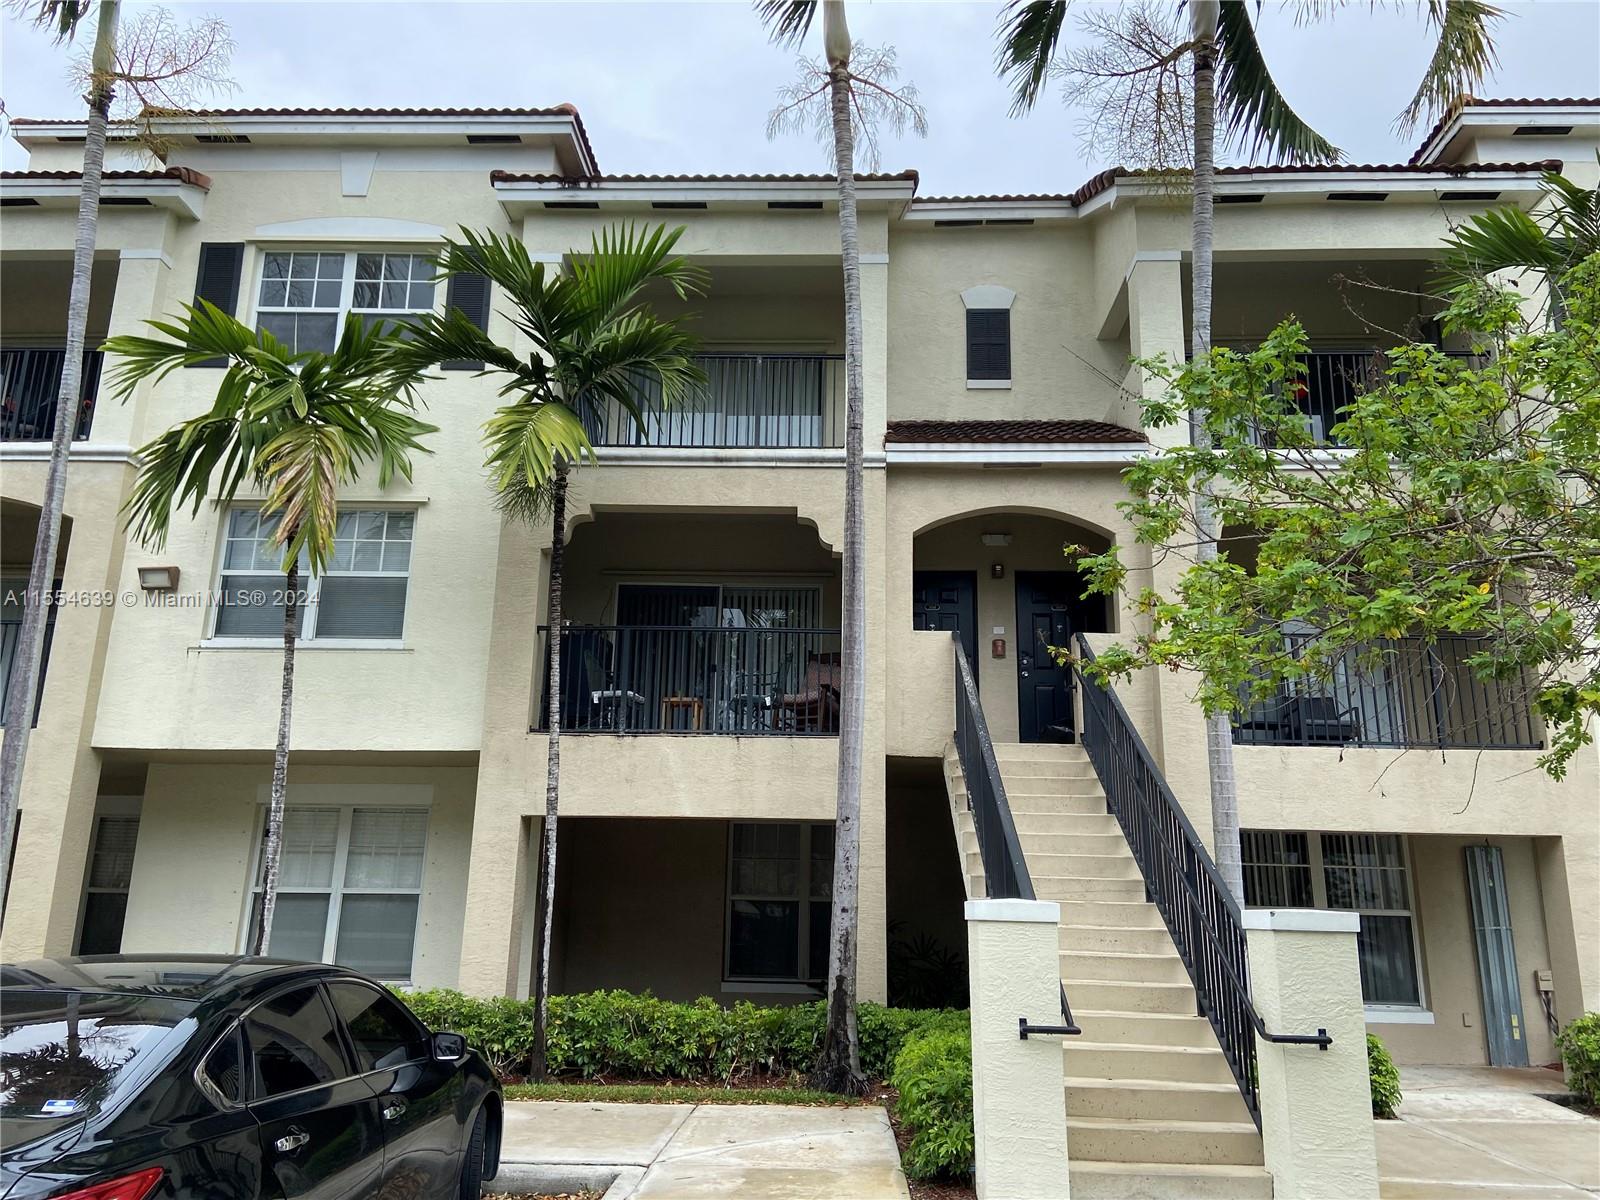 6020 W Sample Rd 304, Coral Springs, Florida 33067, 2 Bedrooms Bedrooms, ,2 BathroomsBathrooms,Residentiallease,For Rent,6020 W Sample Rd 304,A11554639